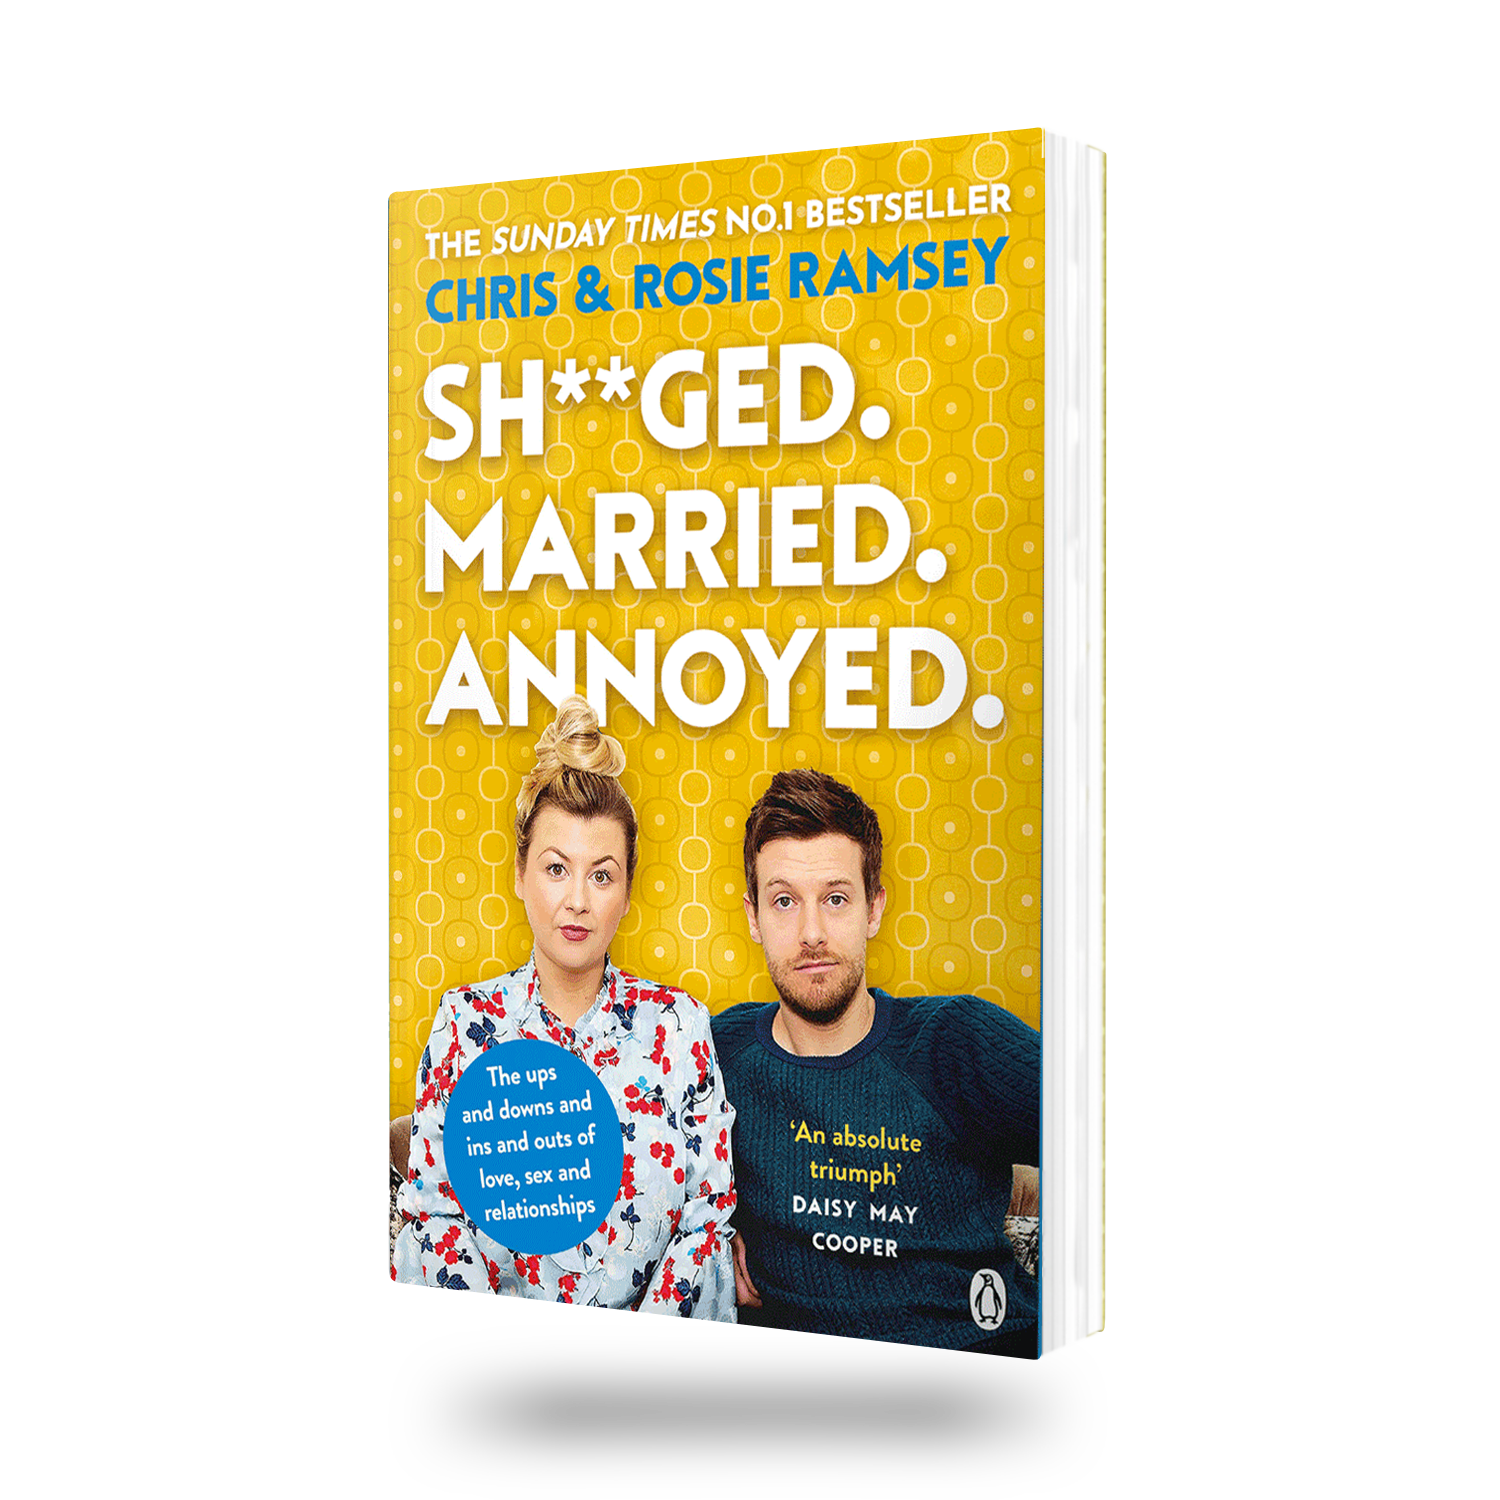 Sh**ged. Married. Annoyed.: The Sunday Times No. 1 Bestseller (Paperback)